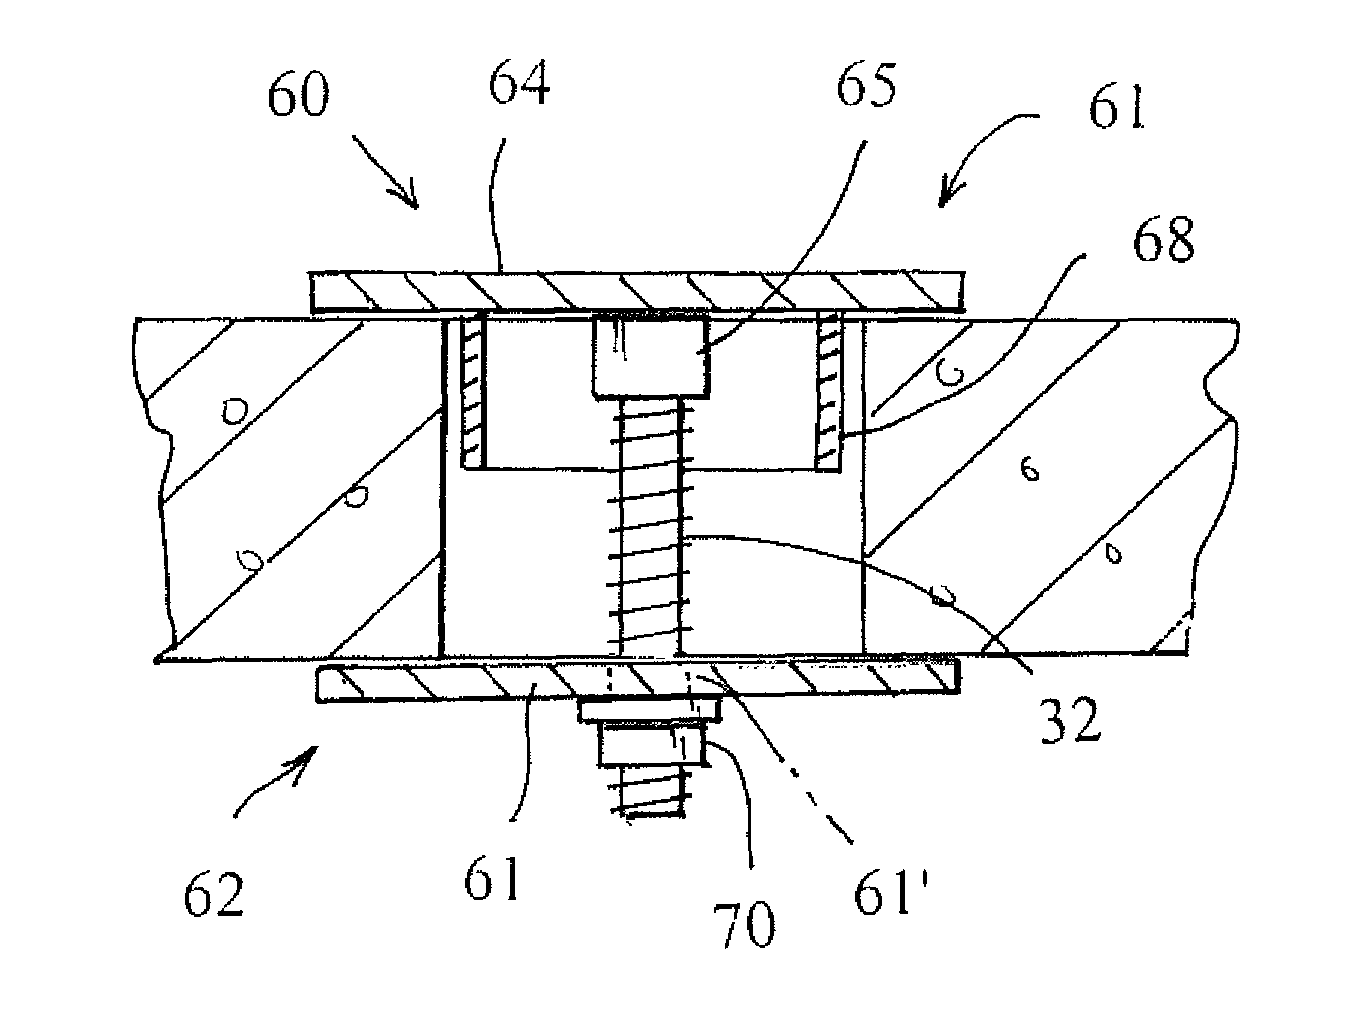 Method of repairing concrete floors and system for same